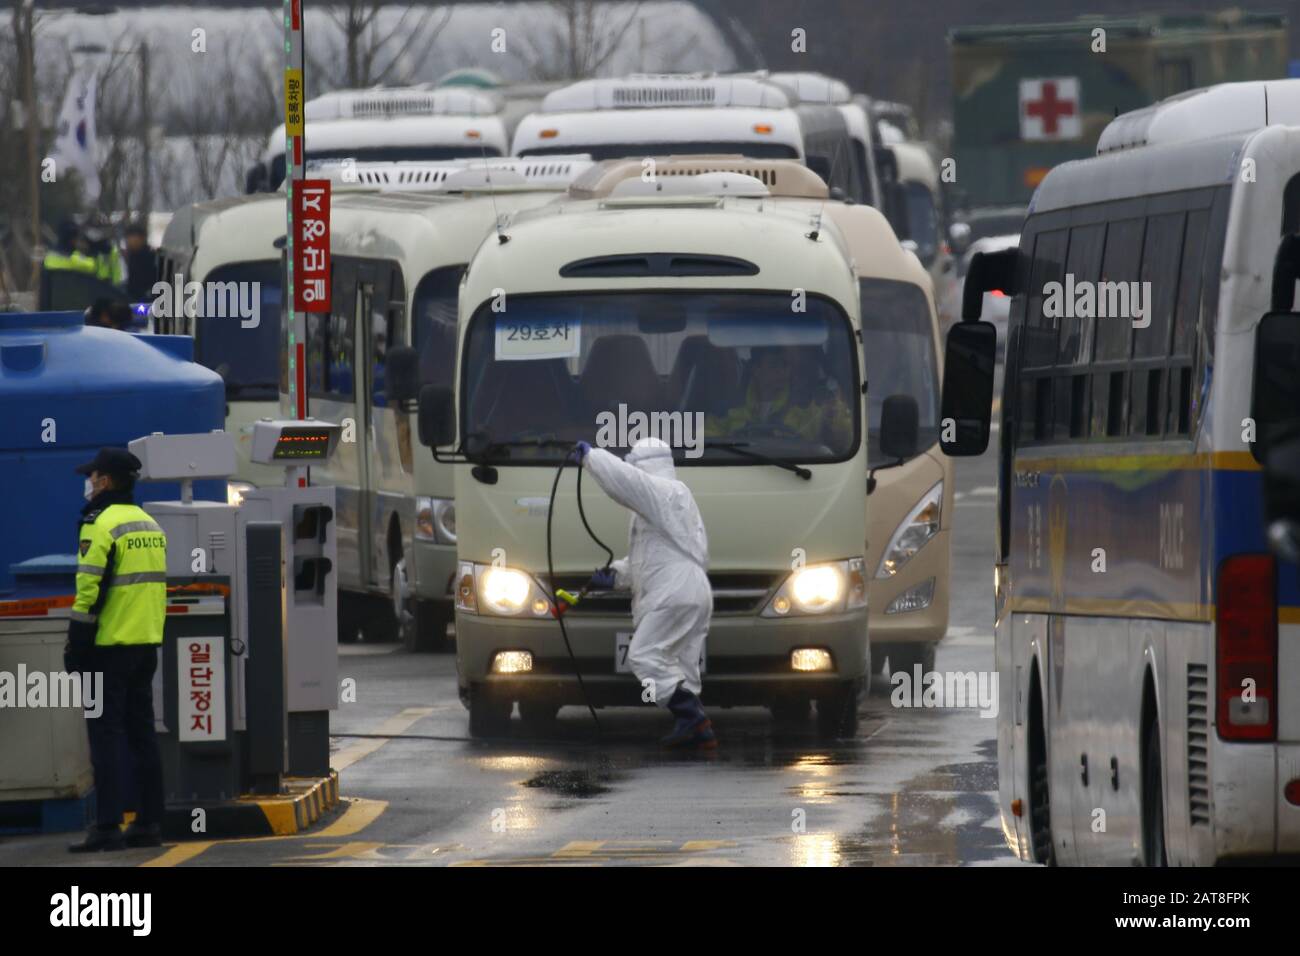 Seoul, South Korea. 31st Jan, 2020. The arrival of about 370 South Korean evacuees from the coronavirus-hit Chinese city of Wuhan headed in 36 police buses for two government-designated accommodations in central parts of the nation Friday after arriving at Gimpo International Airport in western Seoul in the morning. The first batch of 368 South Korean residents of Wuhan, who landed in Gimpo aboard a chartered Korean plane, will be asked to stay at two government-run facilities for the next 14 days. Credit: Ryu Seung-Il/ZUMA Wire/Alamy Live News Stock Photo